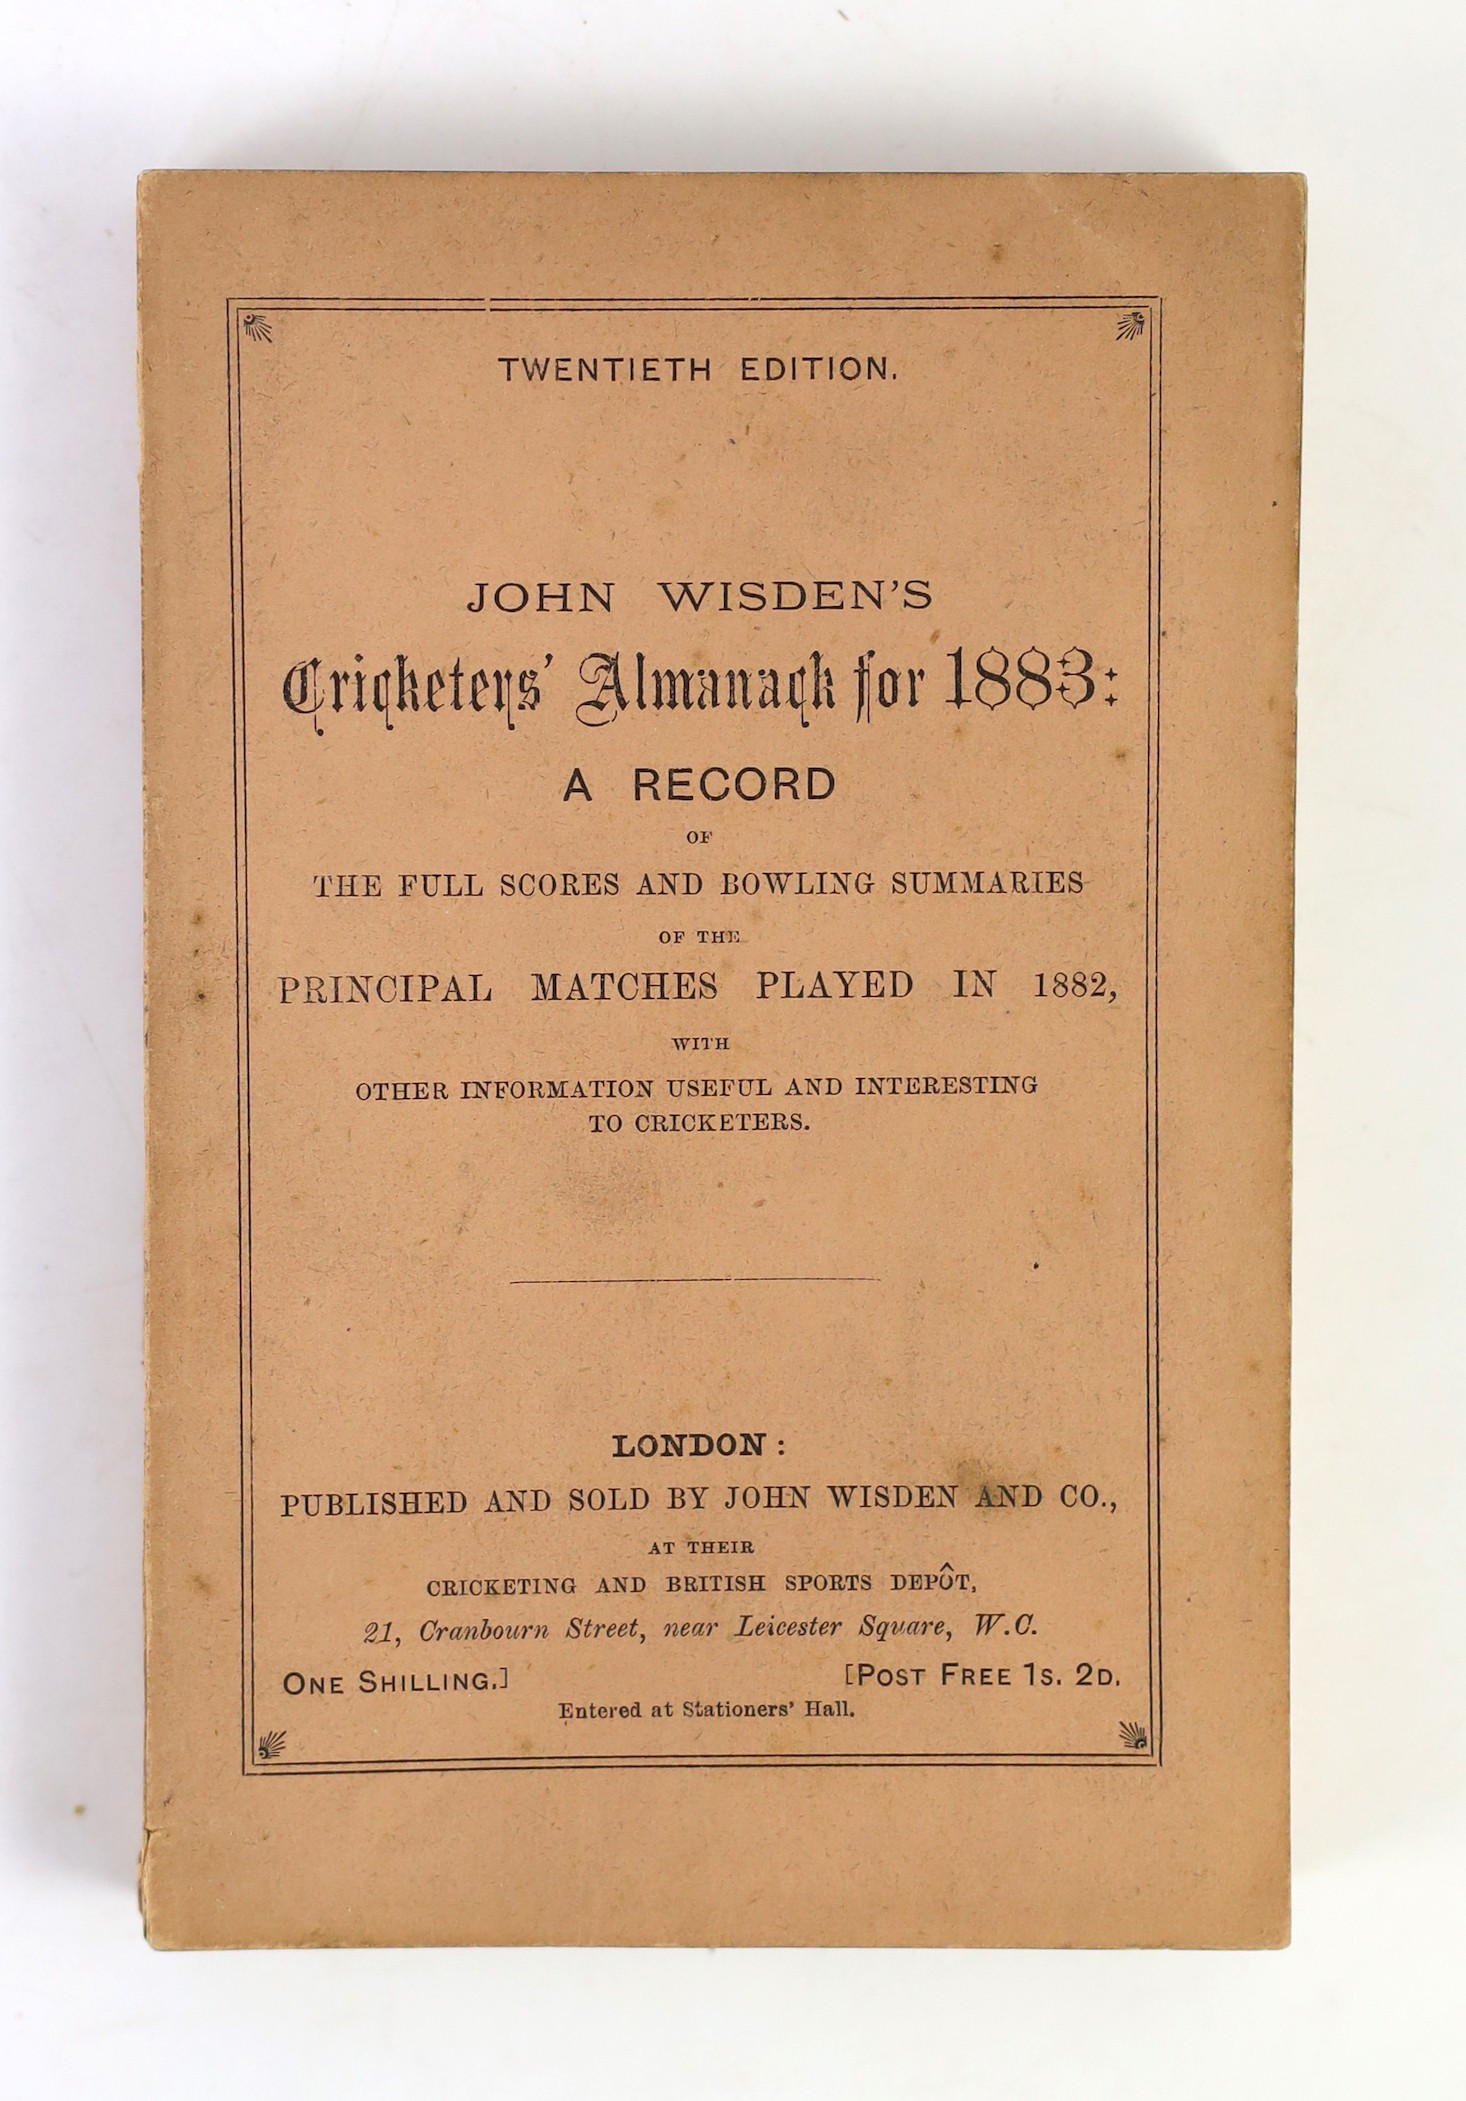 Wisden, John - Cricketers’ Almanack for 1883, 20th edition, original paper wrappers, spotting to early advertisements, title, endpapers and page edges.